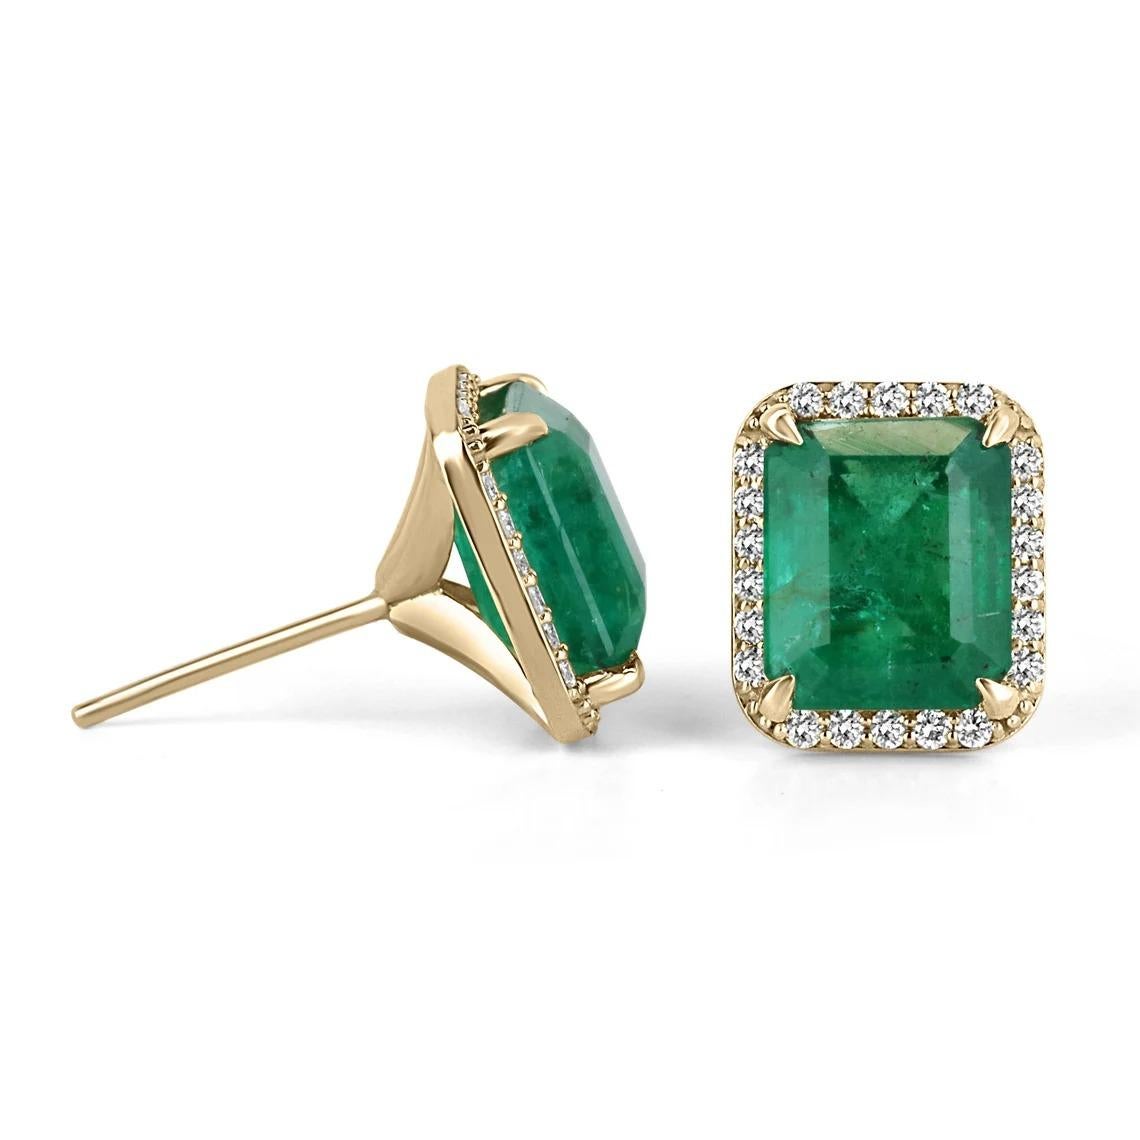 These natural emerald and diamond earrings are a stunning piece of jewelry. The emeralds, with a combined carat weight of 7.90, are the main gemstones and display a lush dark green color with good clarity and luster. They are surrounded by a halo of